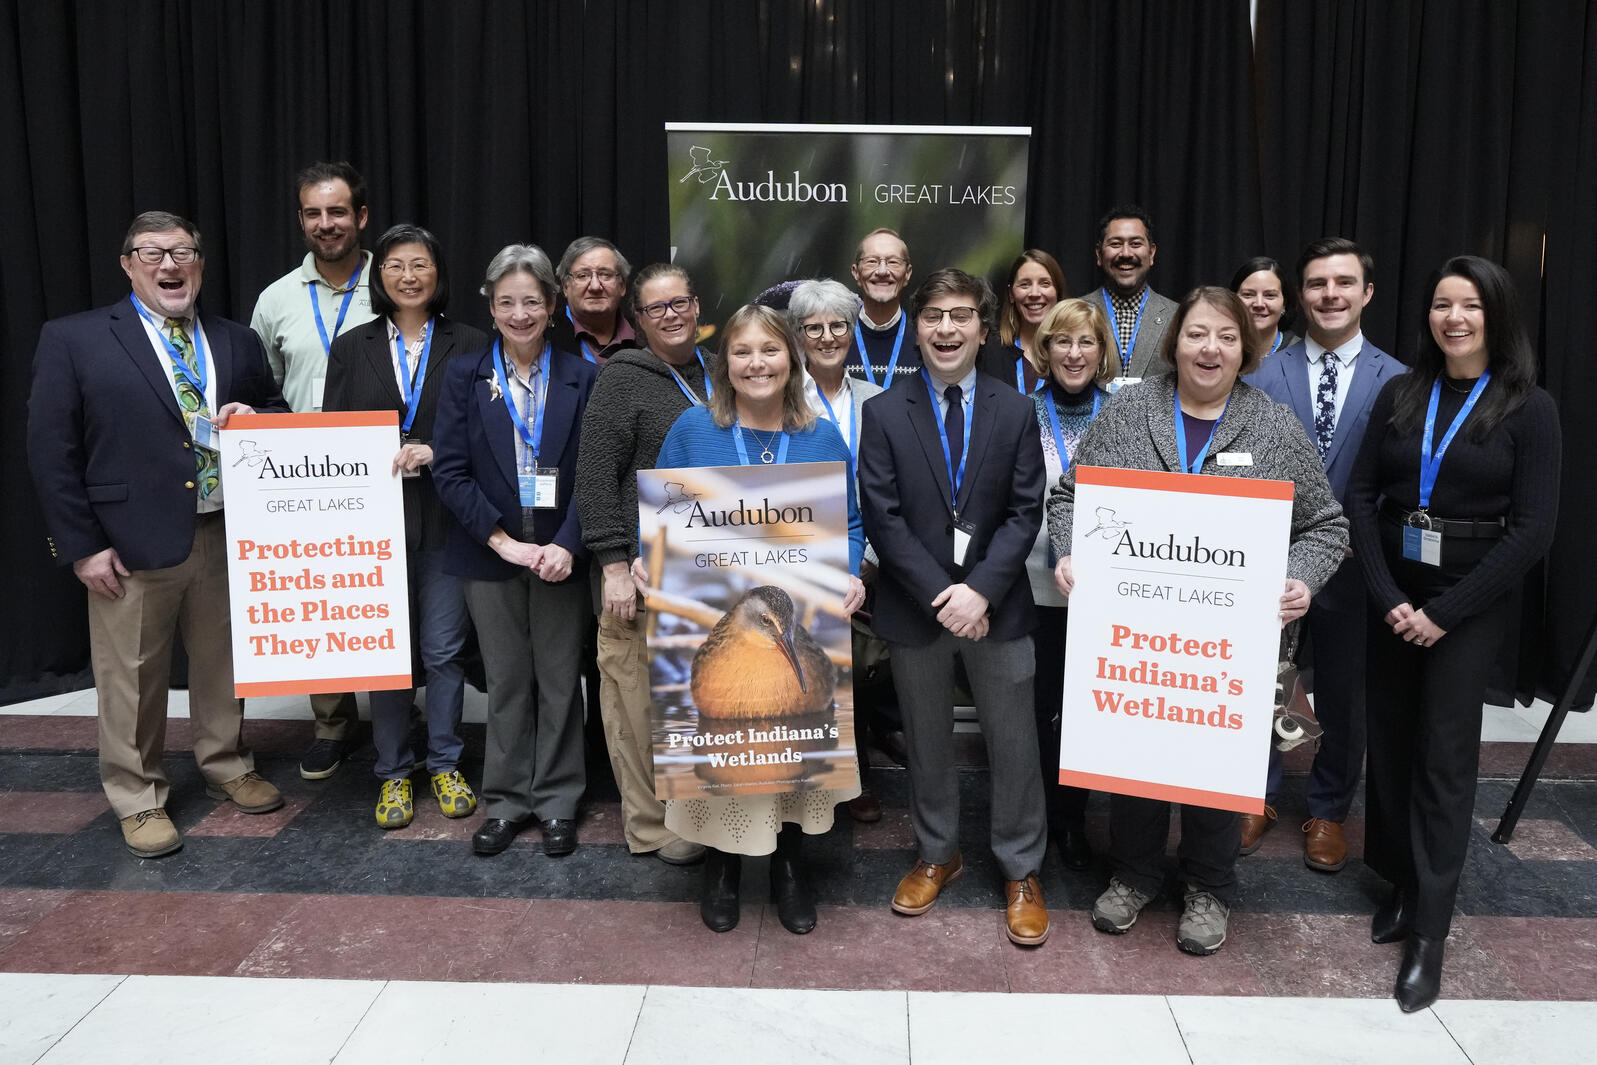 Audubon staff and members pose for a portrait holding signs advocating for the protection of Indiana wetlands during advocacy day at the Indiana Statehouse in Indianapolis. 